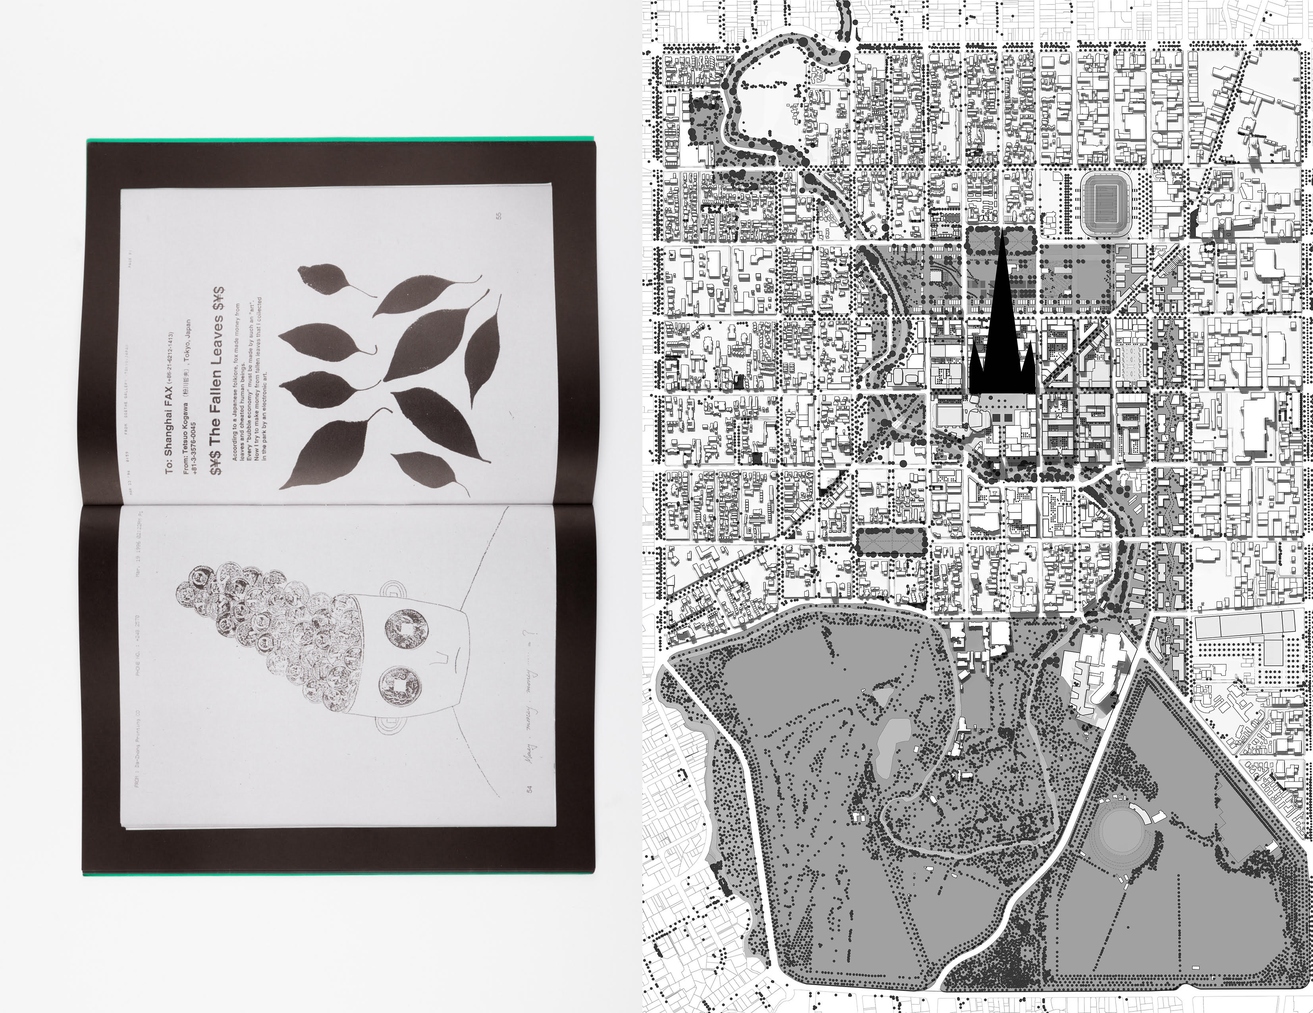 Photo credits: Left, spread from Re-print #2 Shanghai Fax published by 3-ply. Right, map of Christchurch by Matt Galloway.